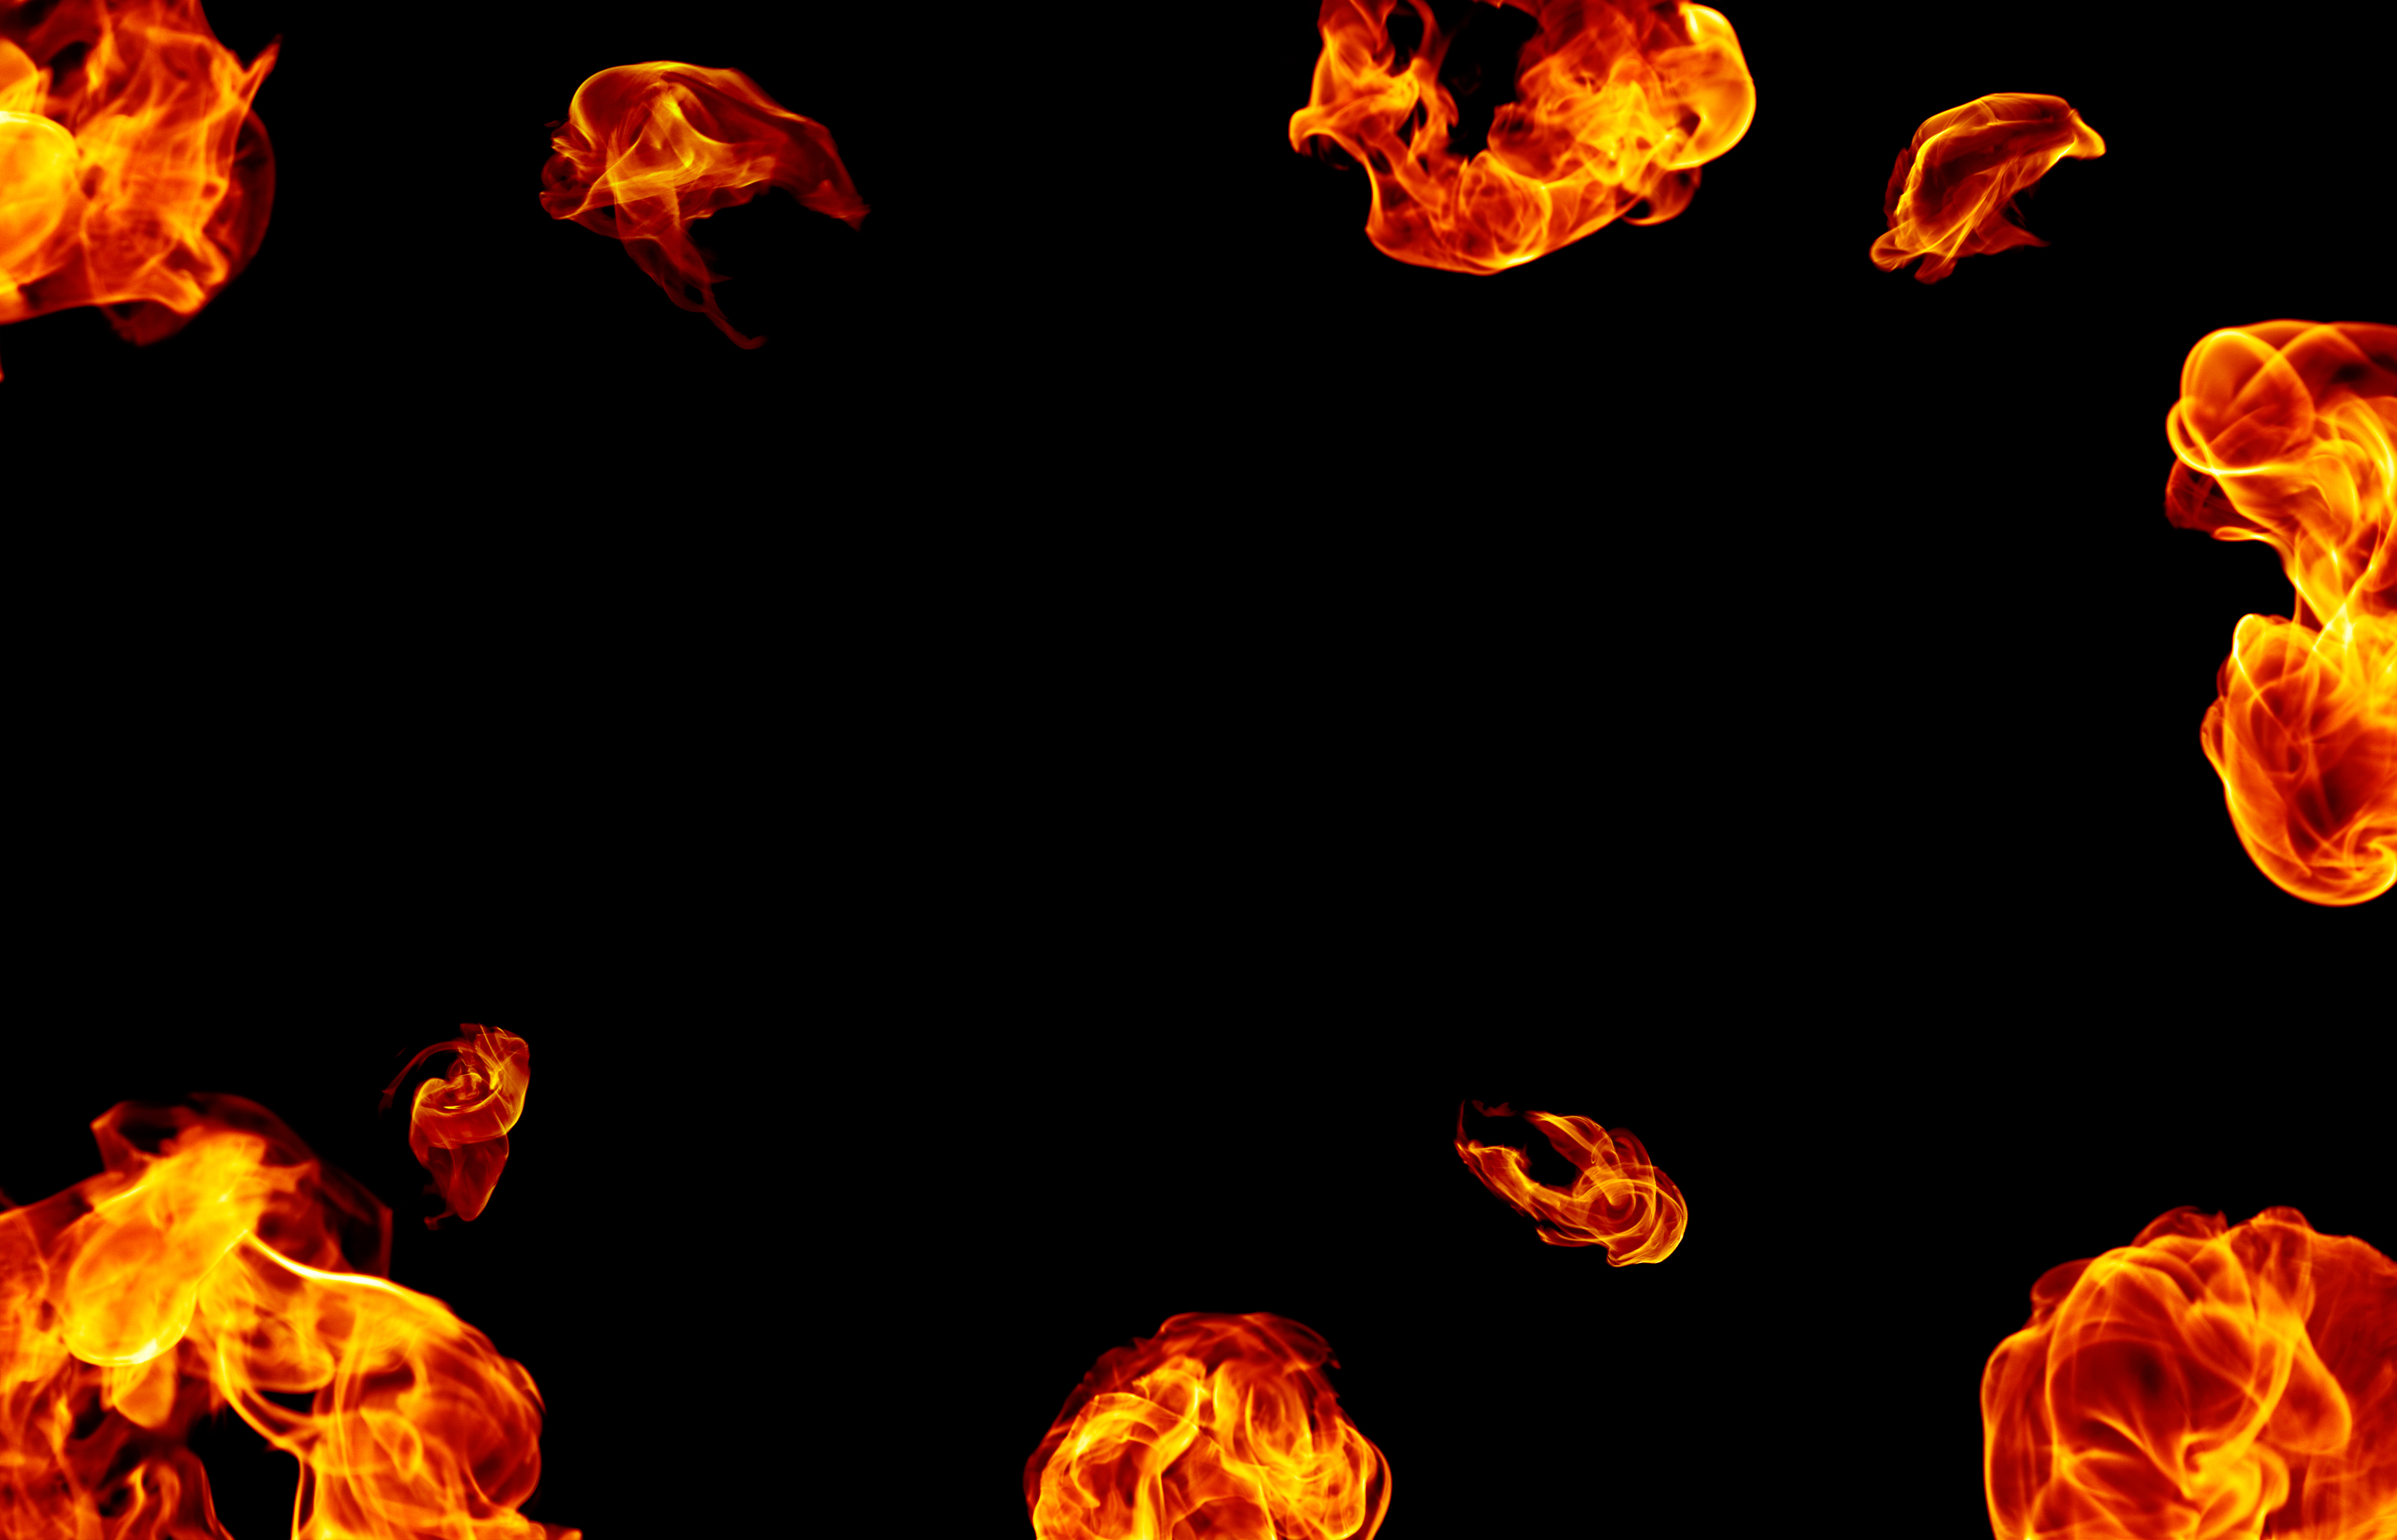 Explosion, Abstract, Hot, Fiery, Fire, HQ Photo